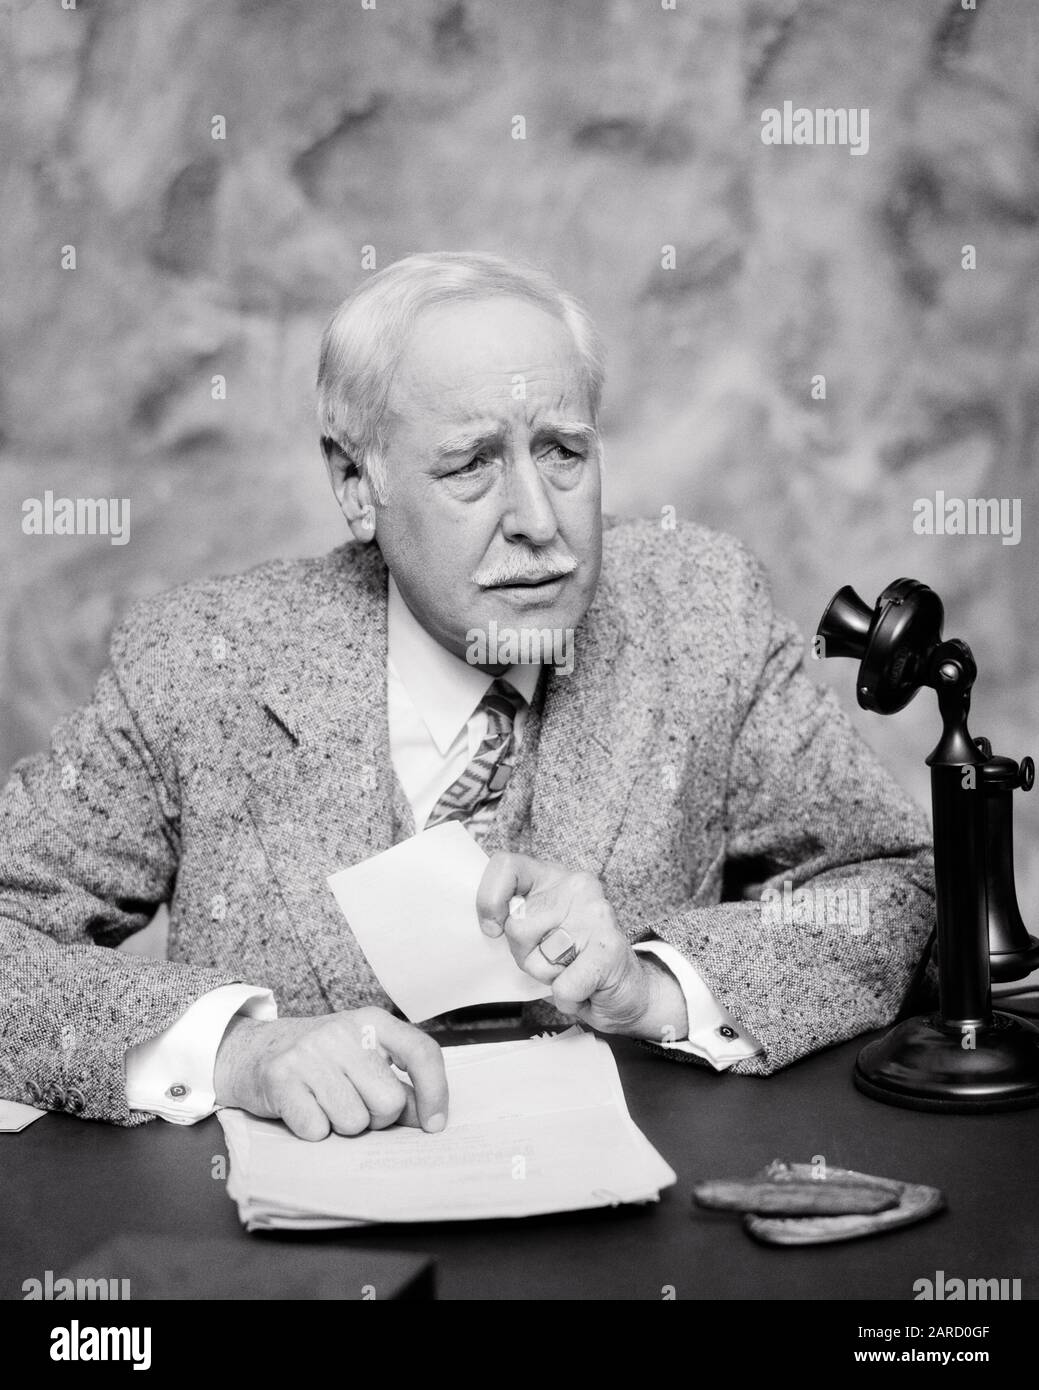 1920s MATURE BUSINESSMAN AT DESK CLUTCHING PAPER CONCERNED FACIAL EXPRESSION CIGAR IN ASHTRAY CANDLESTICK PHONE ON DESK - c3686 HAR001 HARS LIFESTYLE ELDER TWEED STUDIO SHOT MOODY COPY SPACE HALF-LENGTH PERSONS MALES RISK SENIOR MAN VEST SENIOR ADULT EXPRESSIONS TROUBLED B&W CONCERNED SADNESS CANDLESTICK MUSTACHE SUIT AND TIE OLD AGE OLDSTERS OLDSTER MUSTACHES FACIAL HAIR MOOD OCCUPATIONS PHONES ELDERS THREE PIECE SUIT GLUM TELEPHONES STYLISH ASHTRAY MISERABLE BLACK AND WHITE CAUCASIAN ETHNICITY CLUTCHING HAR001 OLD FASHIONED Stock Photo